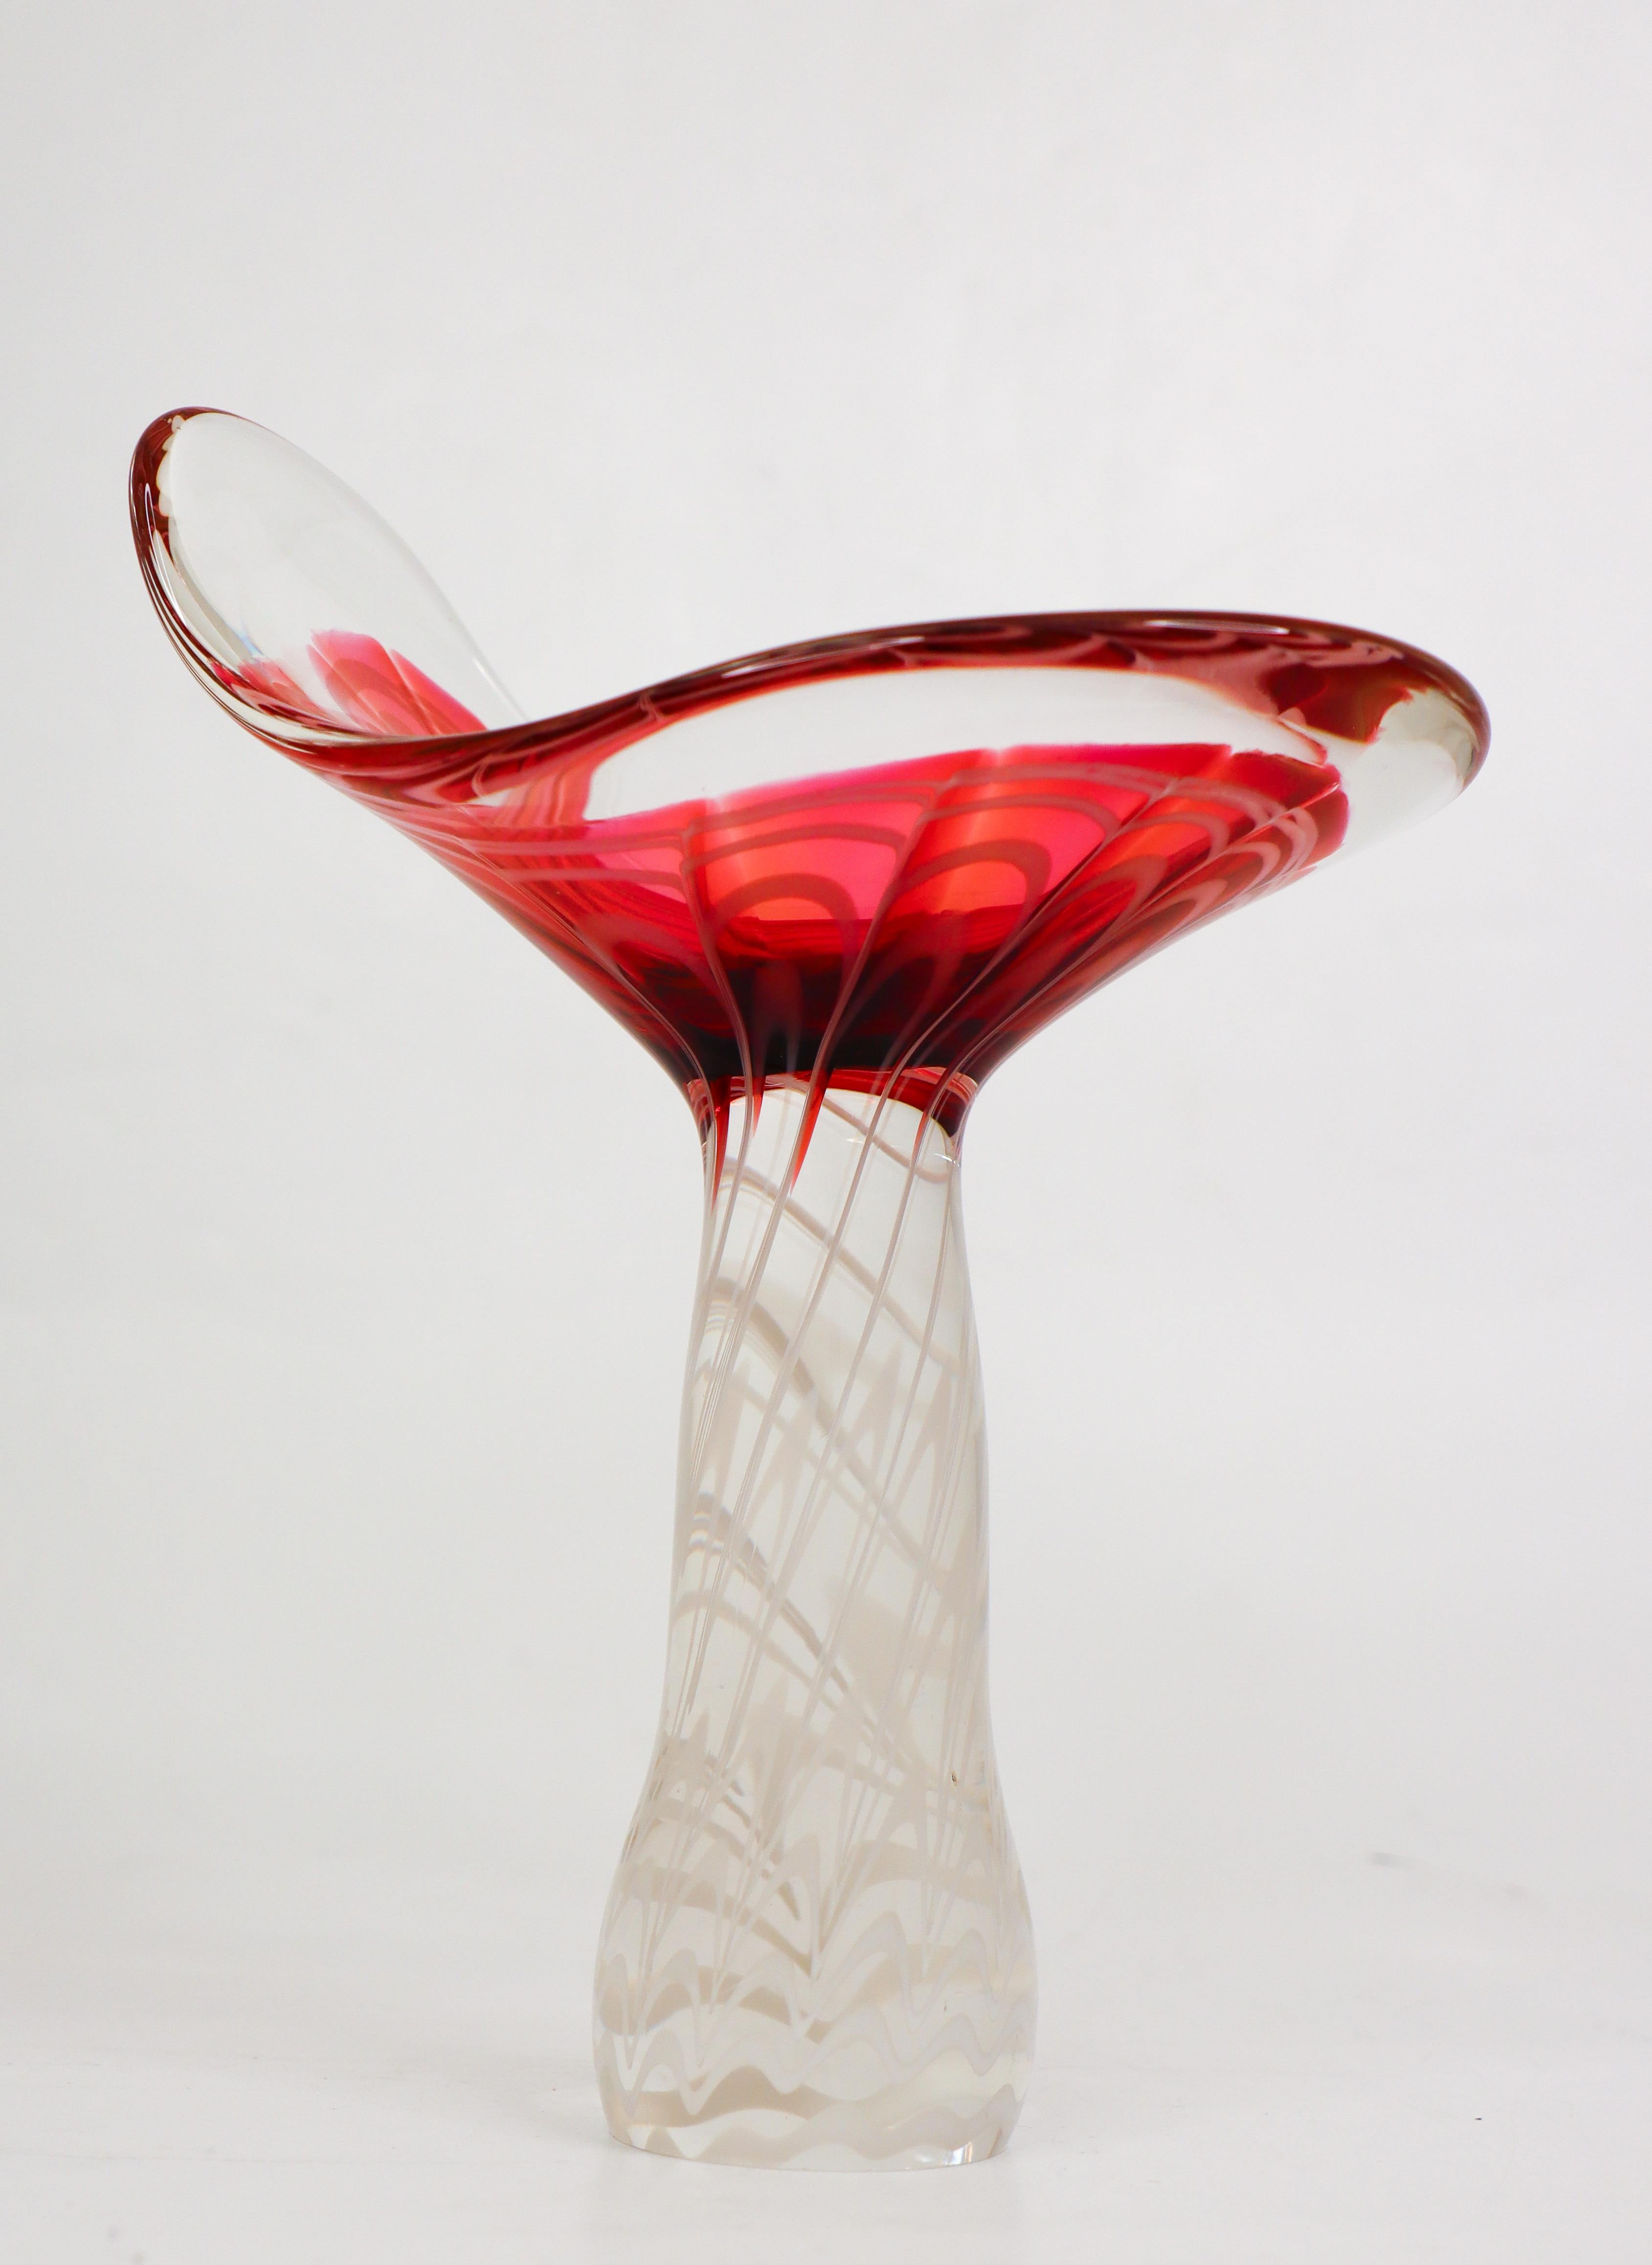 A lovely glass sculpture or bowl with an abstract designed by Paul Kedelv at Flygsfors in Sweden in 1954. This sculpture do have a pink tone and it is 22 cm (8.4